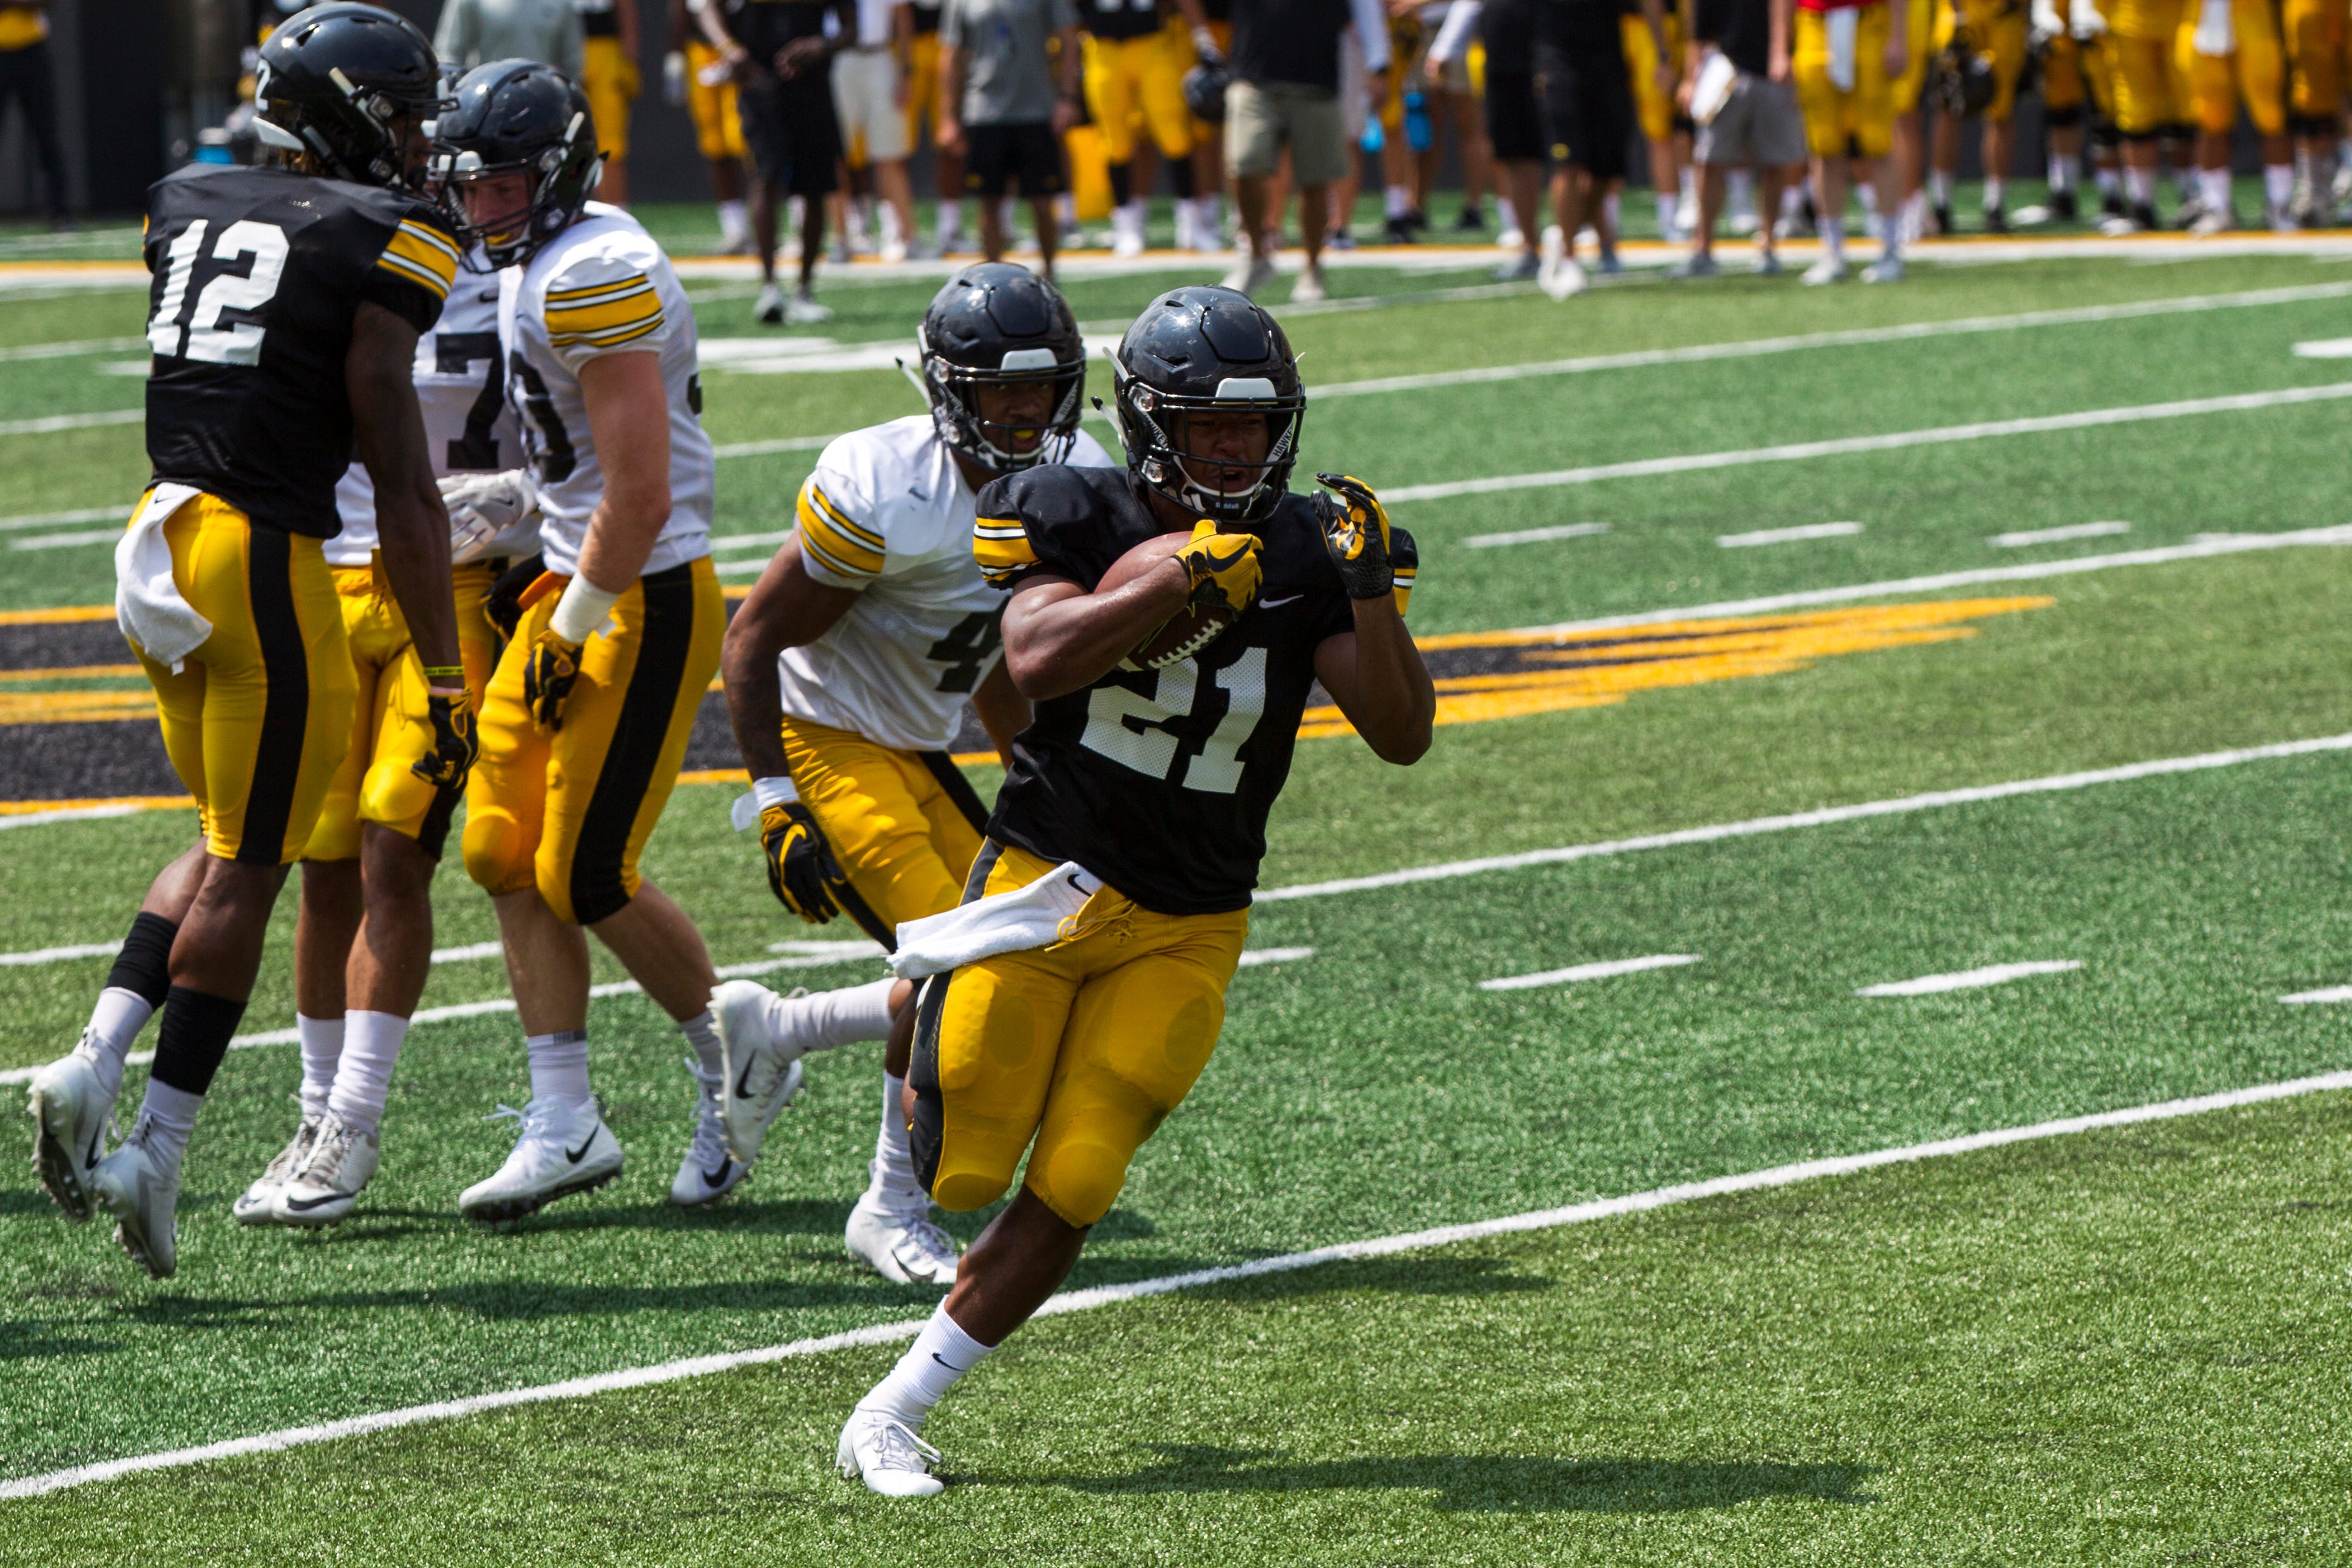 Iowa running back Ivory-Kelly Martin runs the ball during a Kids Day practice on Saturday, Aug. 11, 2018, at Kinnick Stadium in Iowa City.